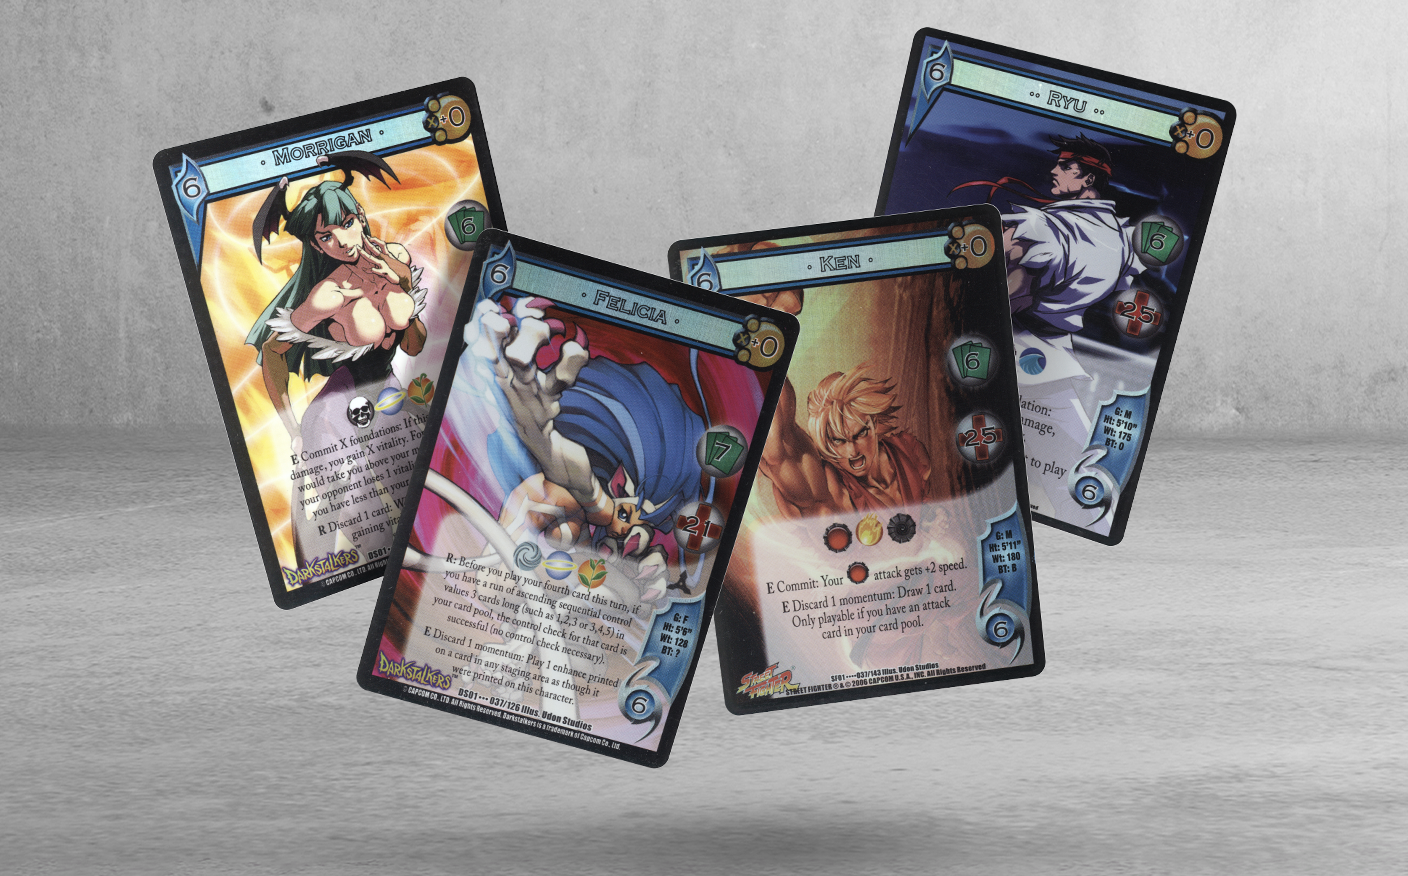 Darkstalkers cards that feature Cassandra, Felicia, Ken, and Ryu